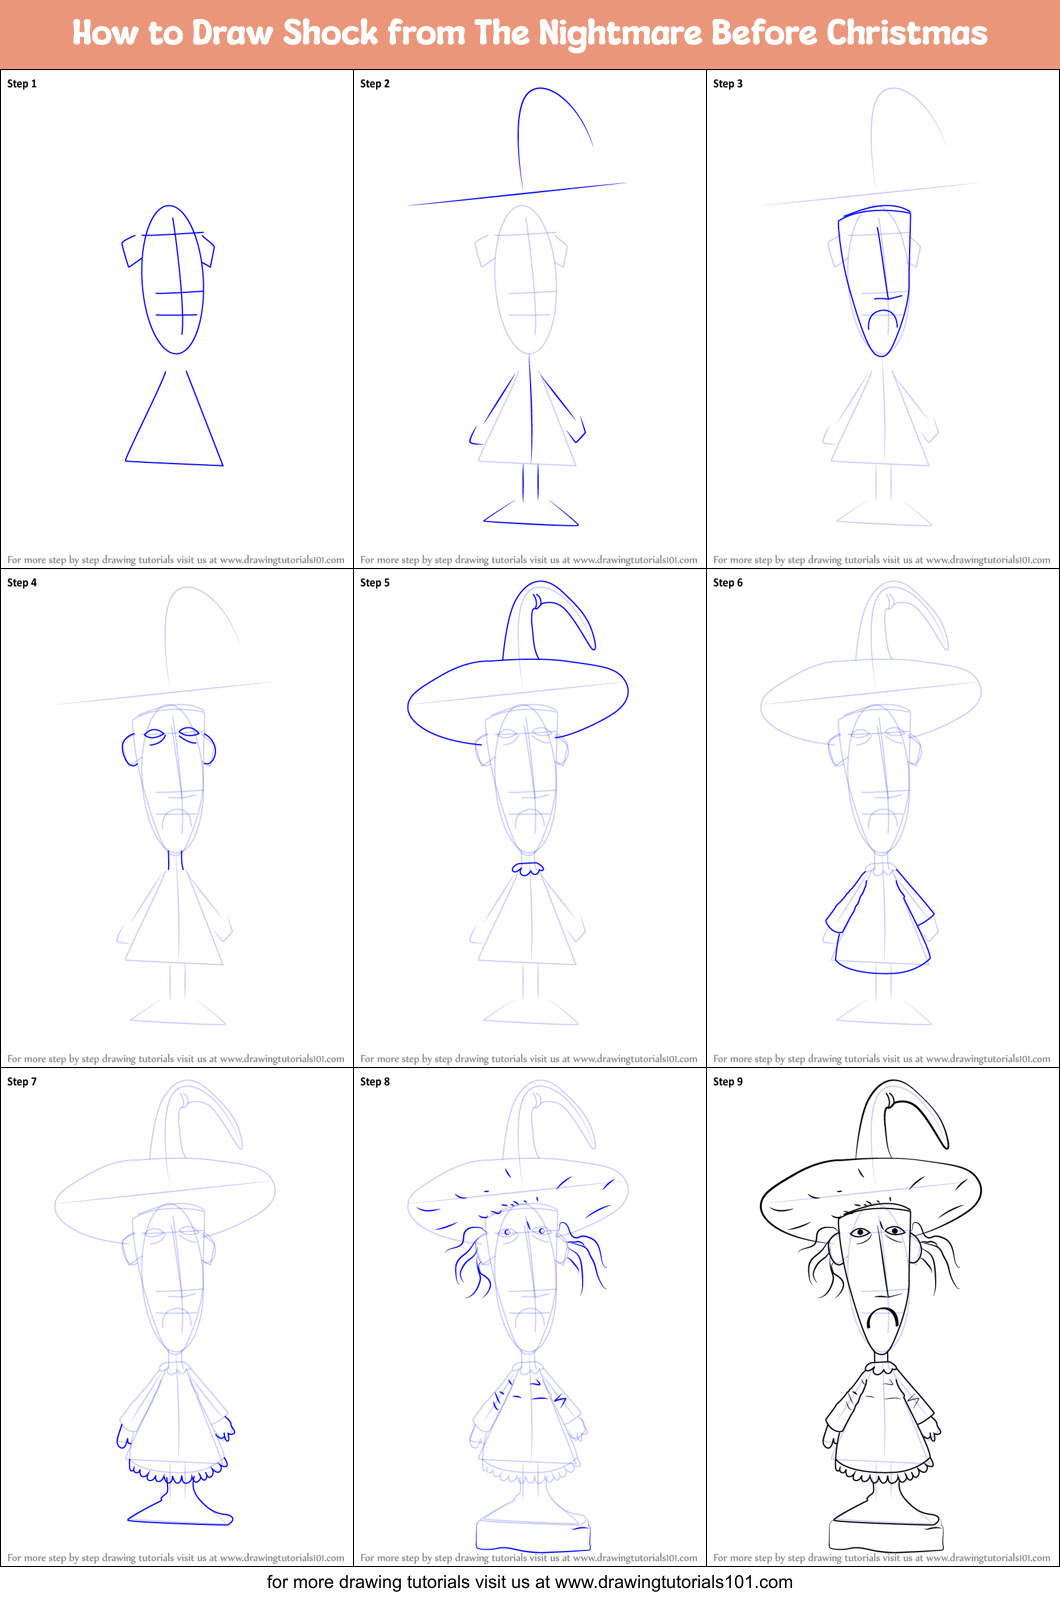 How to Draw Shock from The Nightmare Before Christmas printable step by